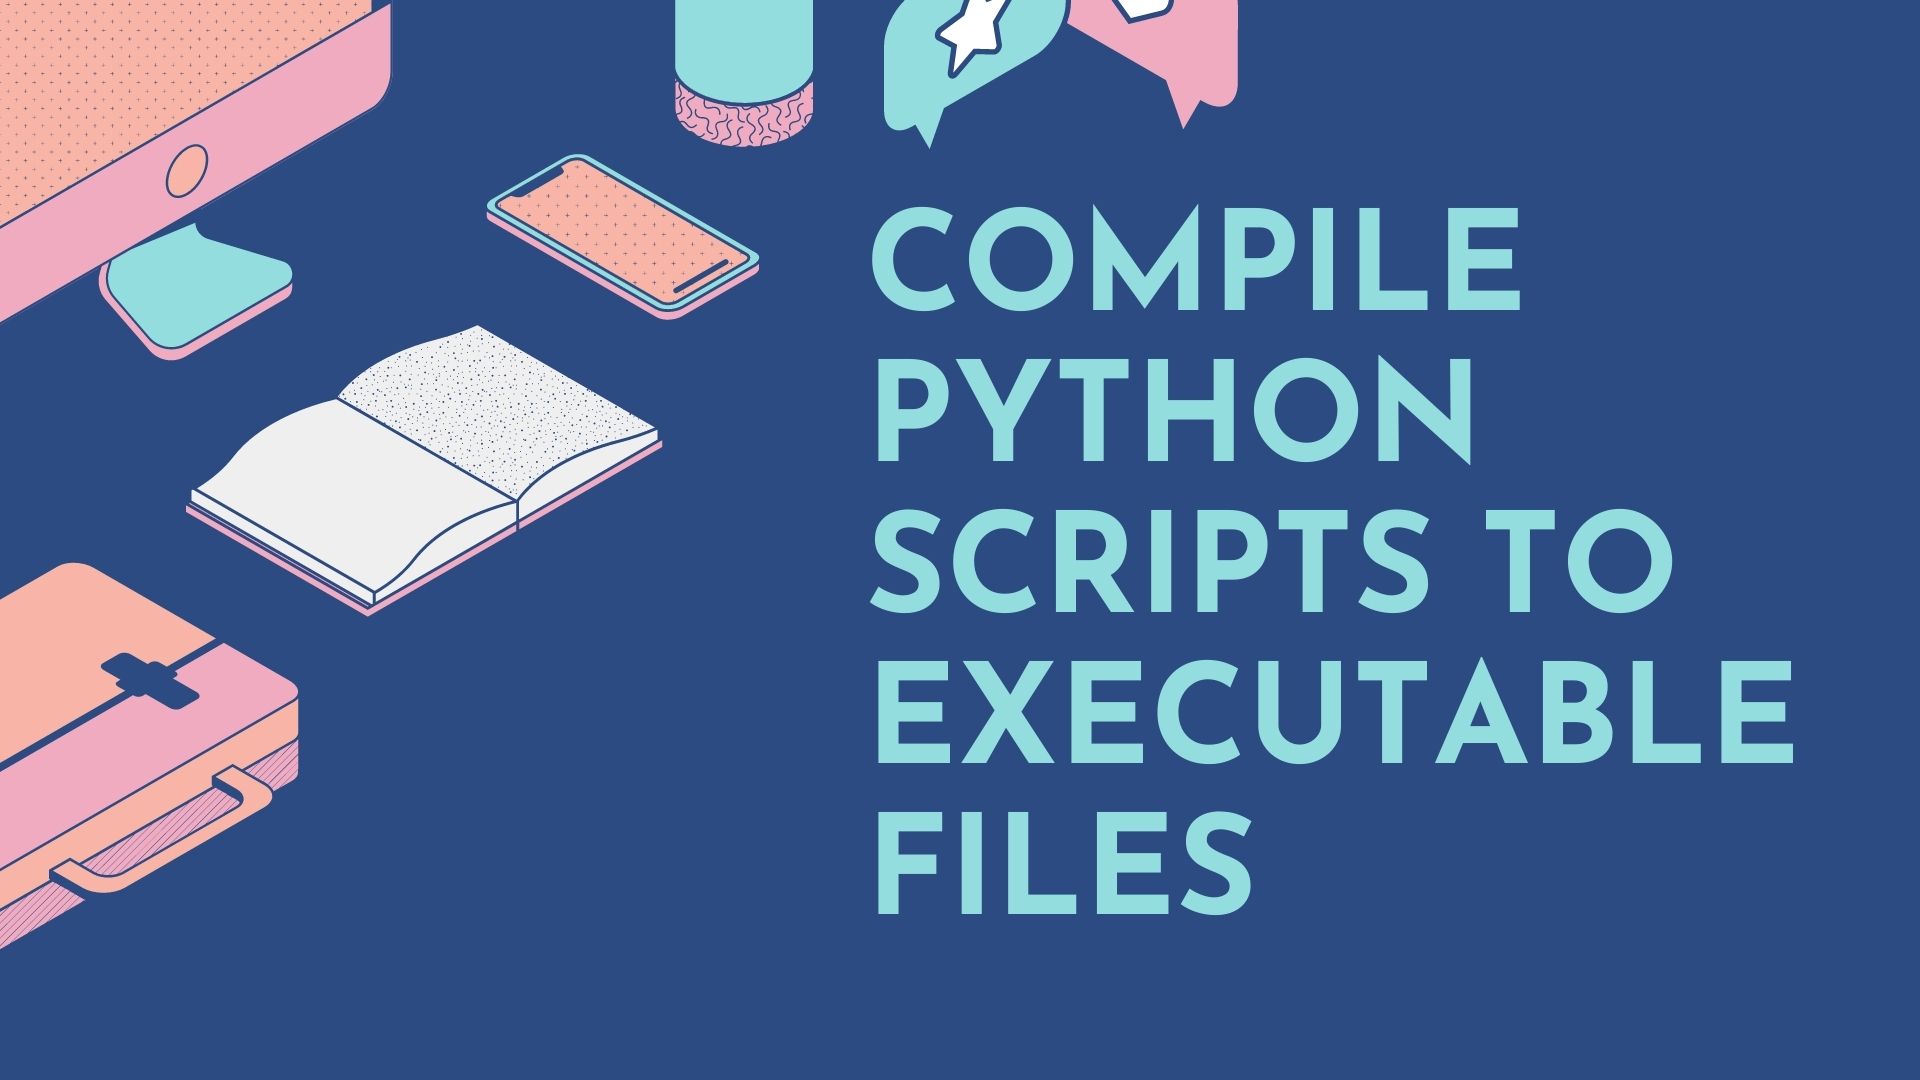 Compile Python Scripts to Executable Files - Geeky Humans